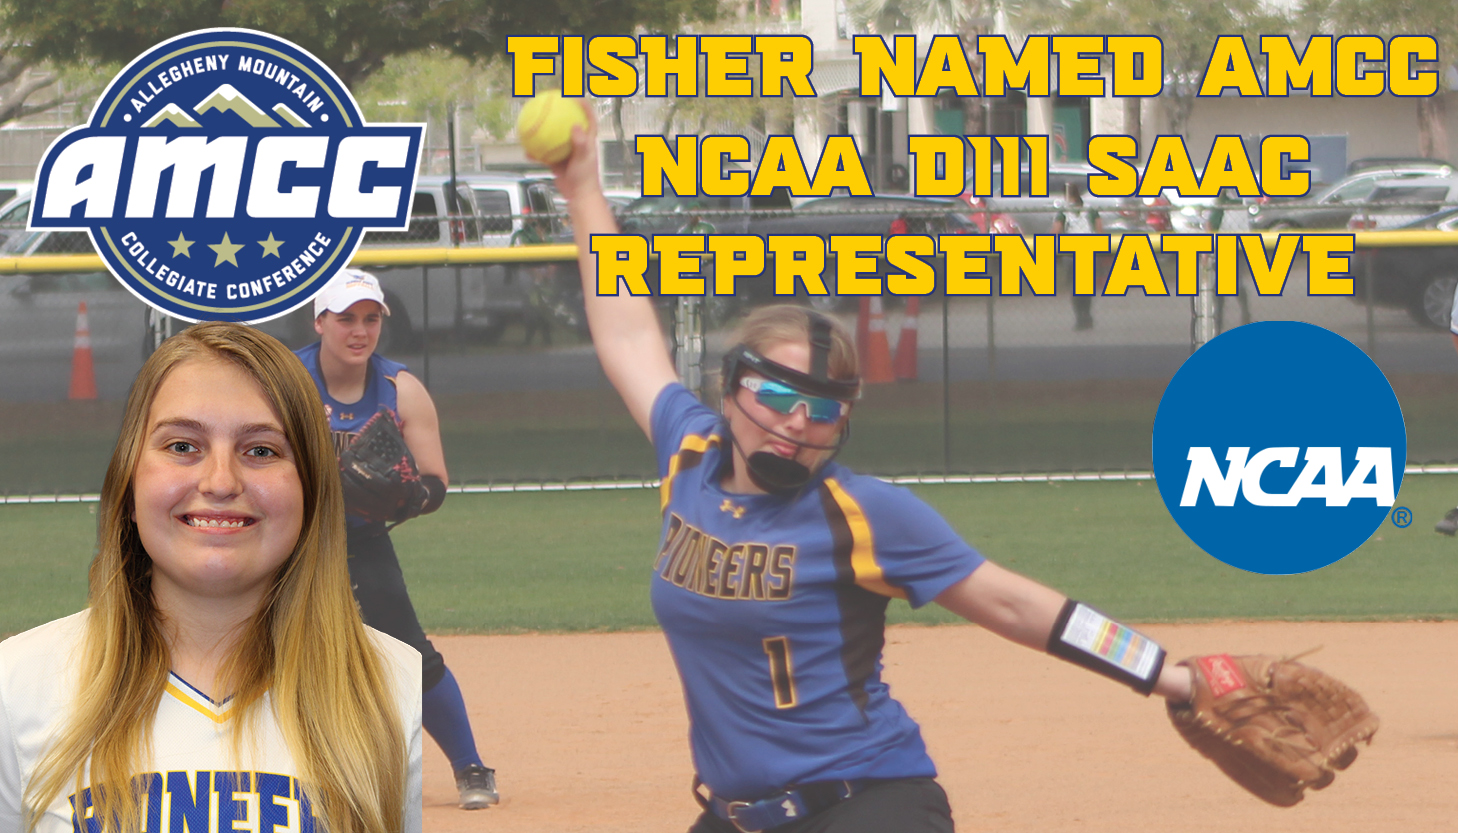 Fisher named the AMCC Representative to NCAA DIII Student Athlete Advisory Committee

Fisher is pictured here on the mound in her motion about to deliver a pitch during a game in Florida in 2020 - also pictured is her 2021 headshot.